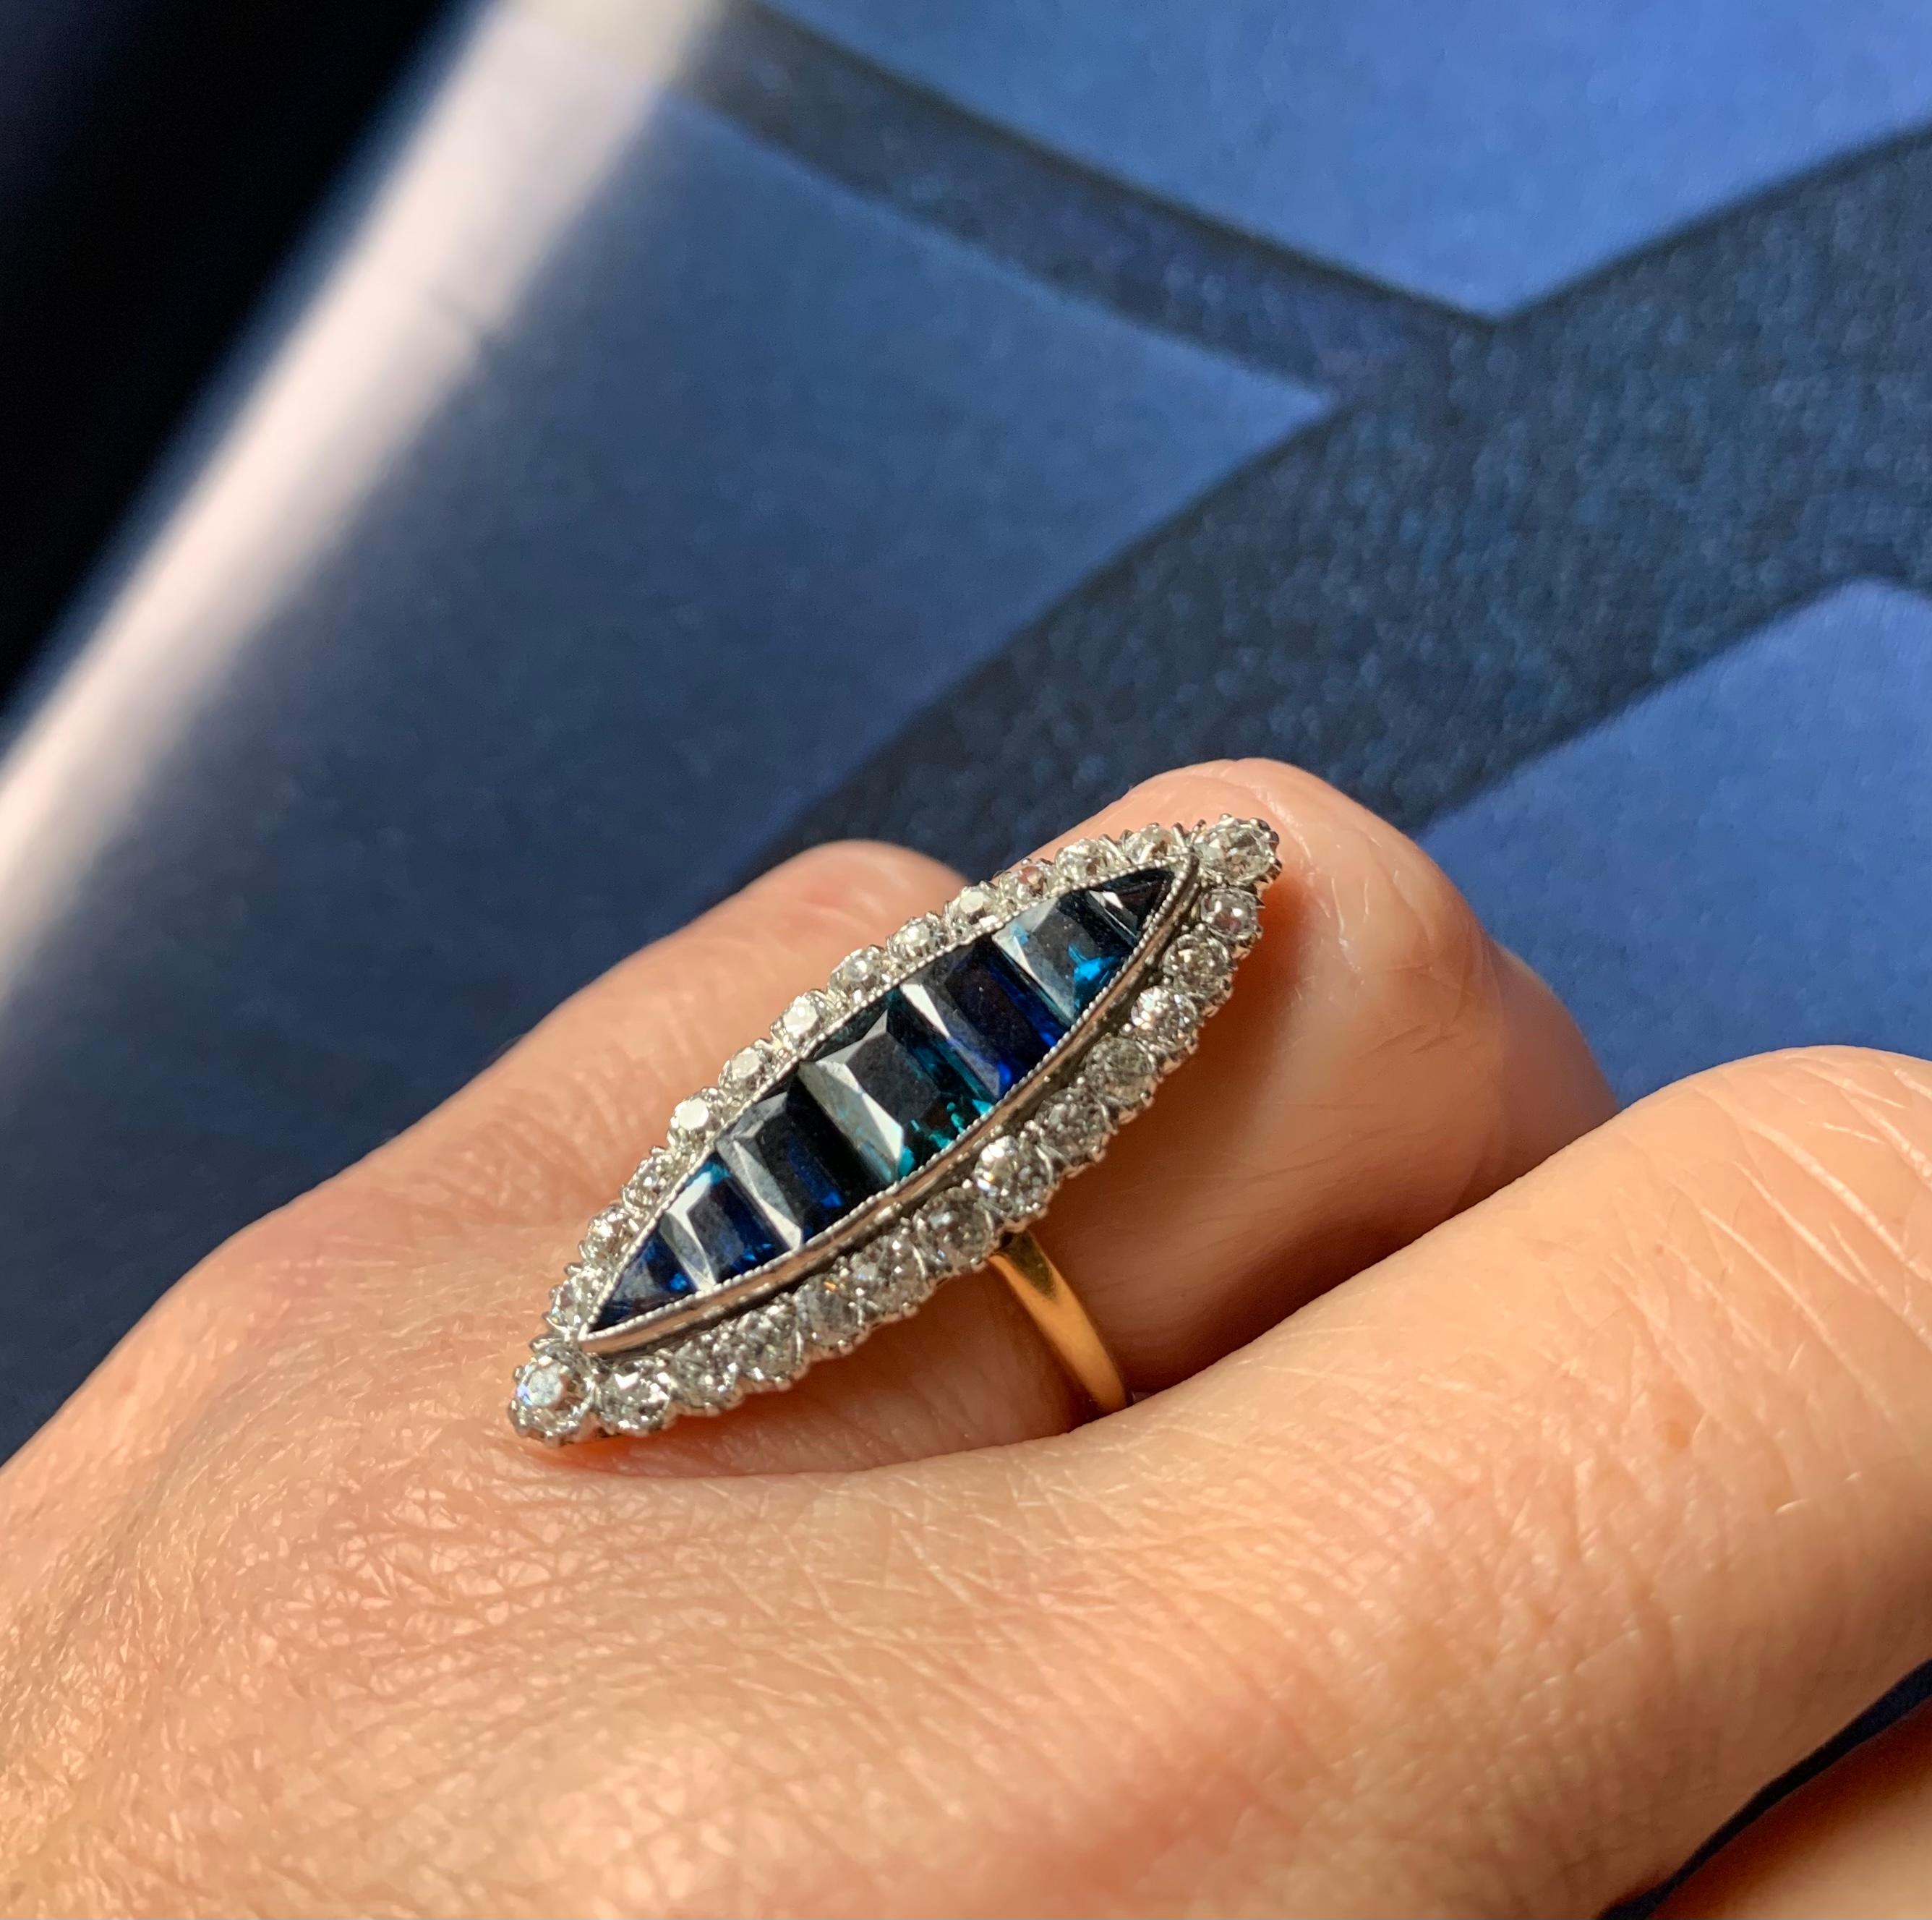 Elegant Edwardian period diamond and sapphire Navette ring measuring an impressive 33mm in length, approximately knuckle to knuckle on the finger. The graceful sensual form posesses the ability to elongate the finger and complement the hand. The